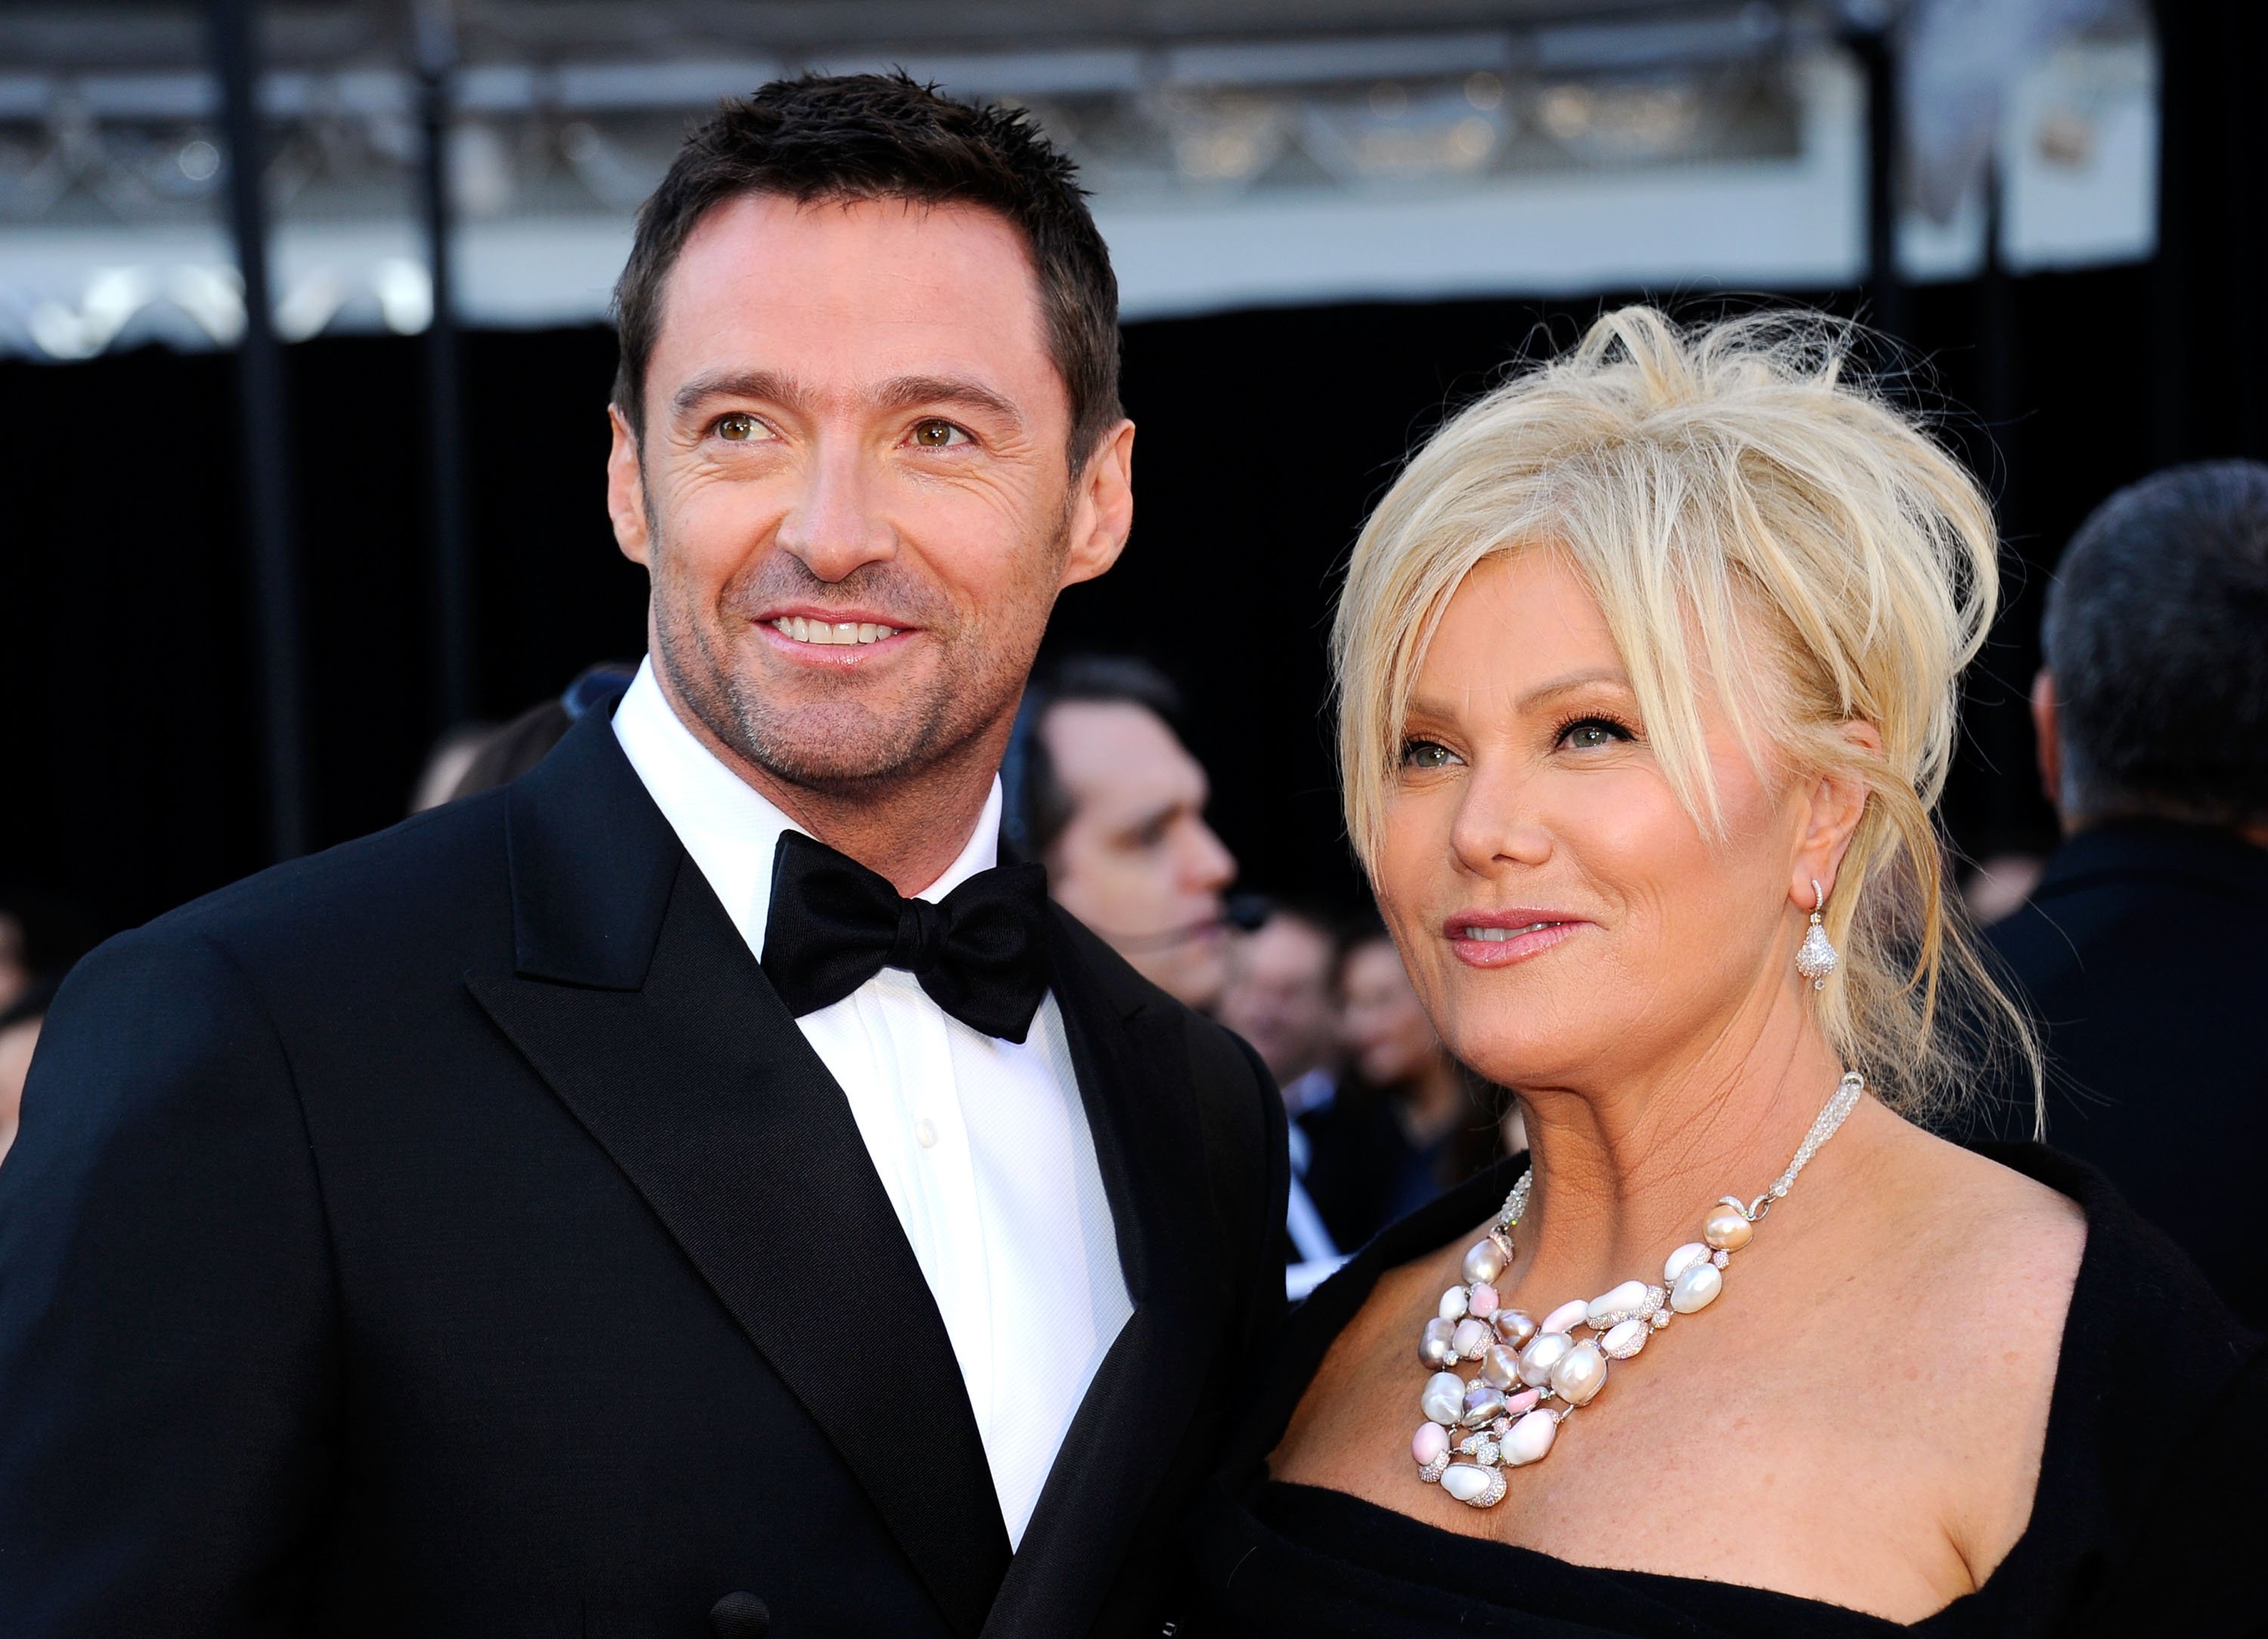 Hugh Jackman and wife Deborra-Lee Furness arrive at the 83rd Annual Academy Awards held at the Kodak Theatre on February 27, 2011 in Hollywood, California | Source: Getty Images 